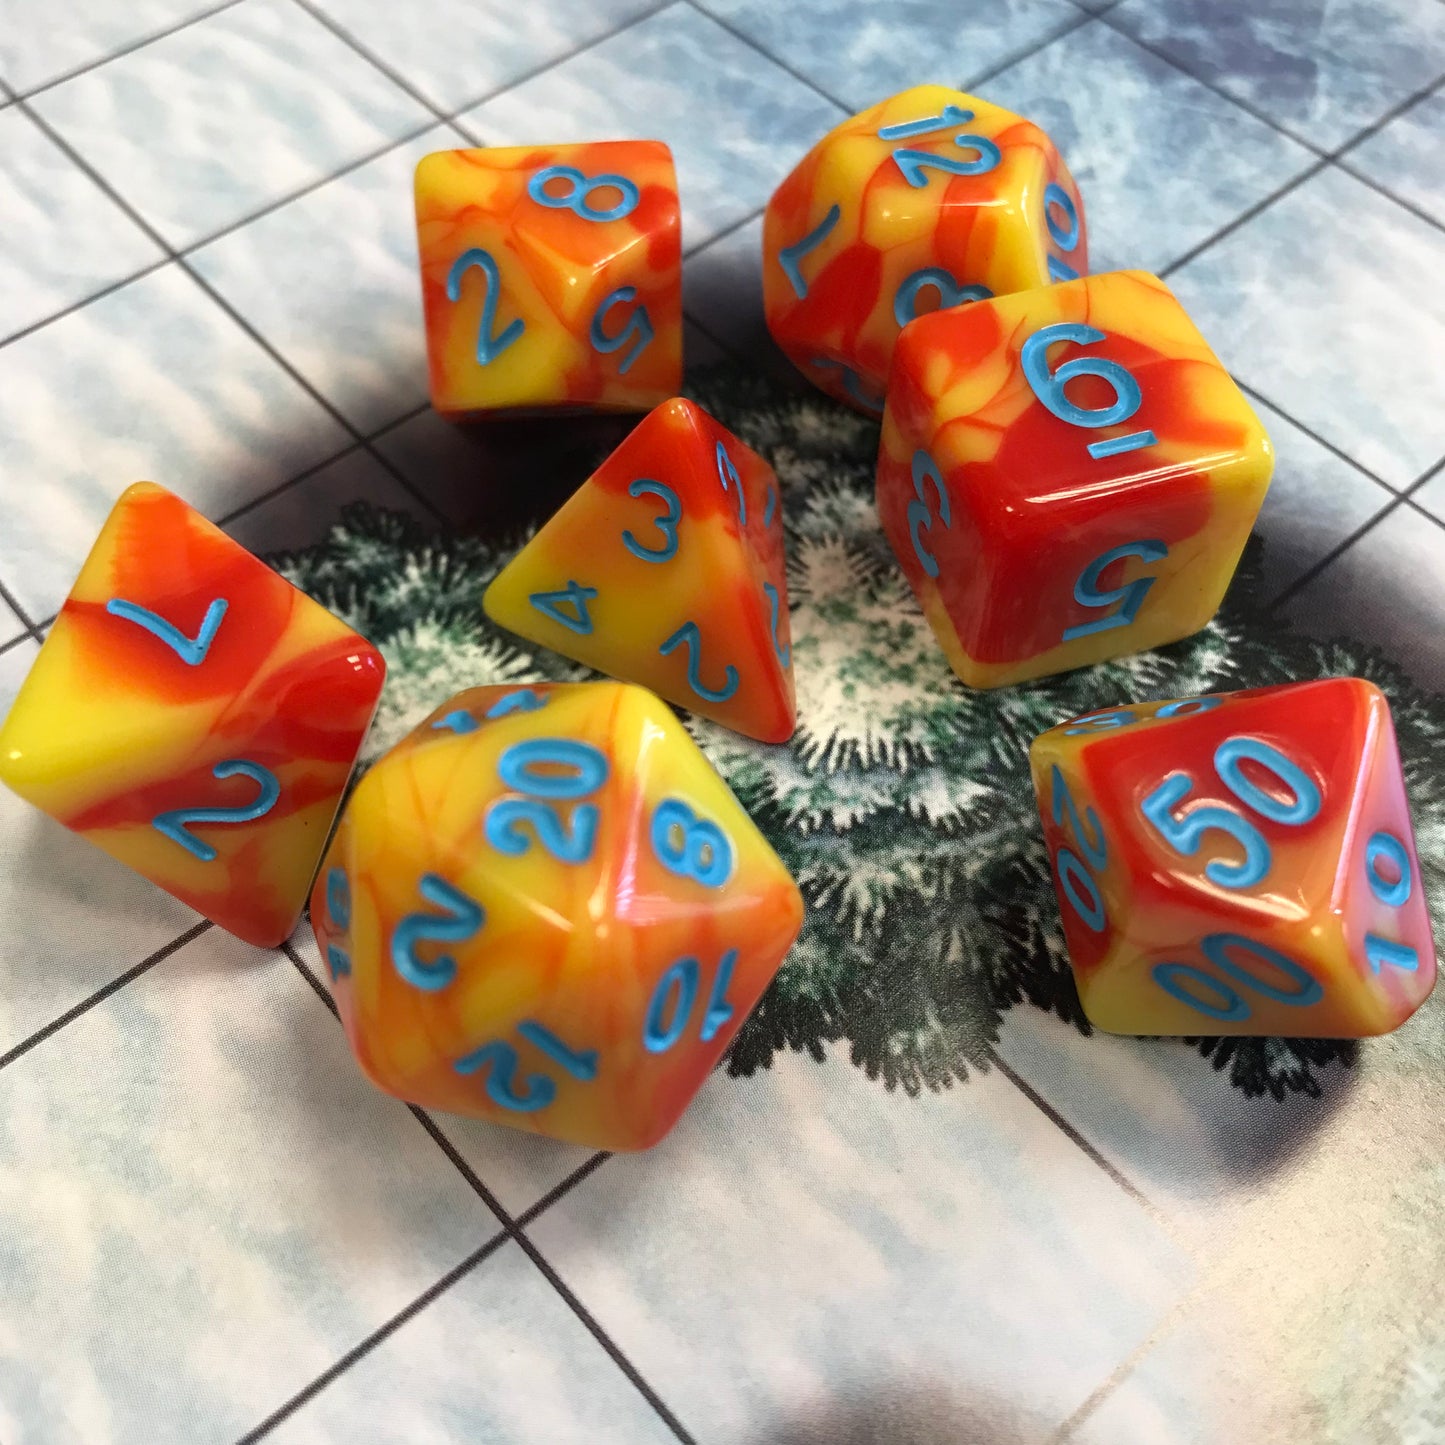 Rising Phoenix TTRPG/DND dice set for dice goblins and role playing games from a UK DND store